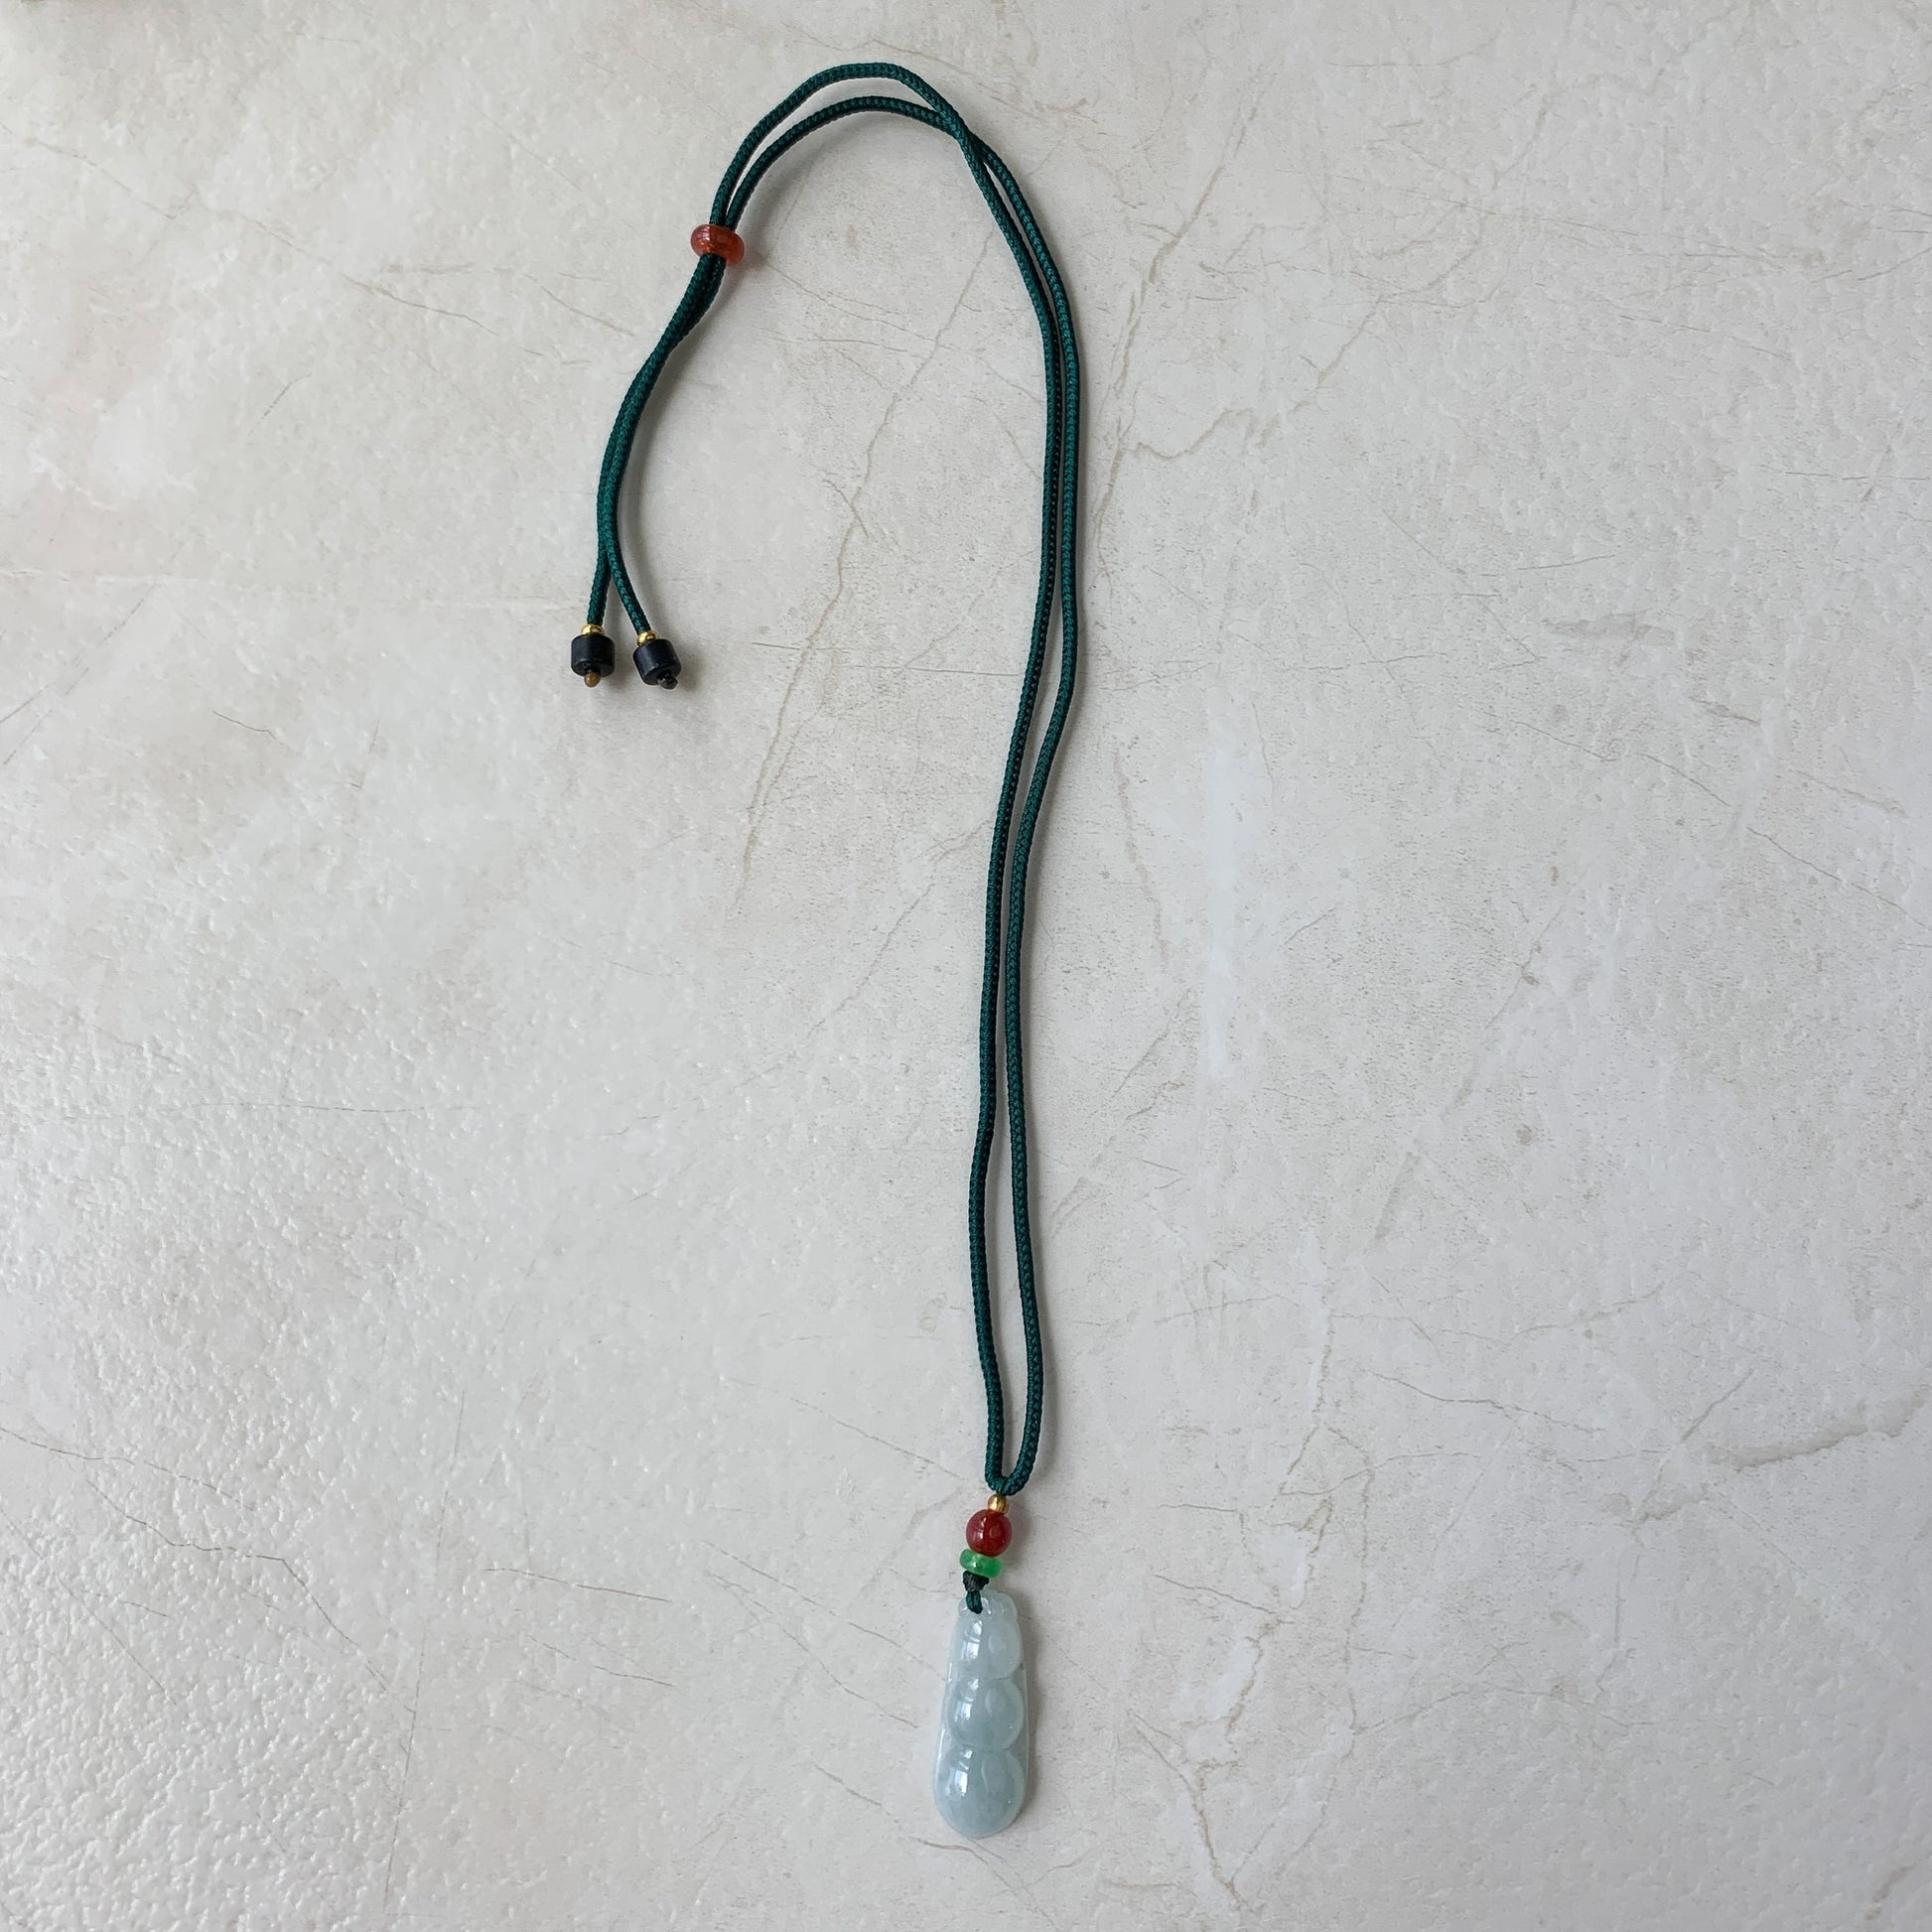 Jadeite Jade Icy Translucent Snow Pea Carved Necklace, YJ-0321-0427724 - AriaDesignCollection